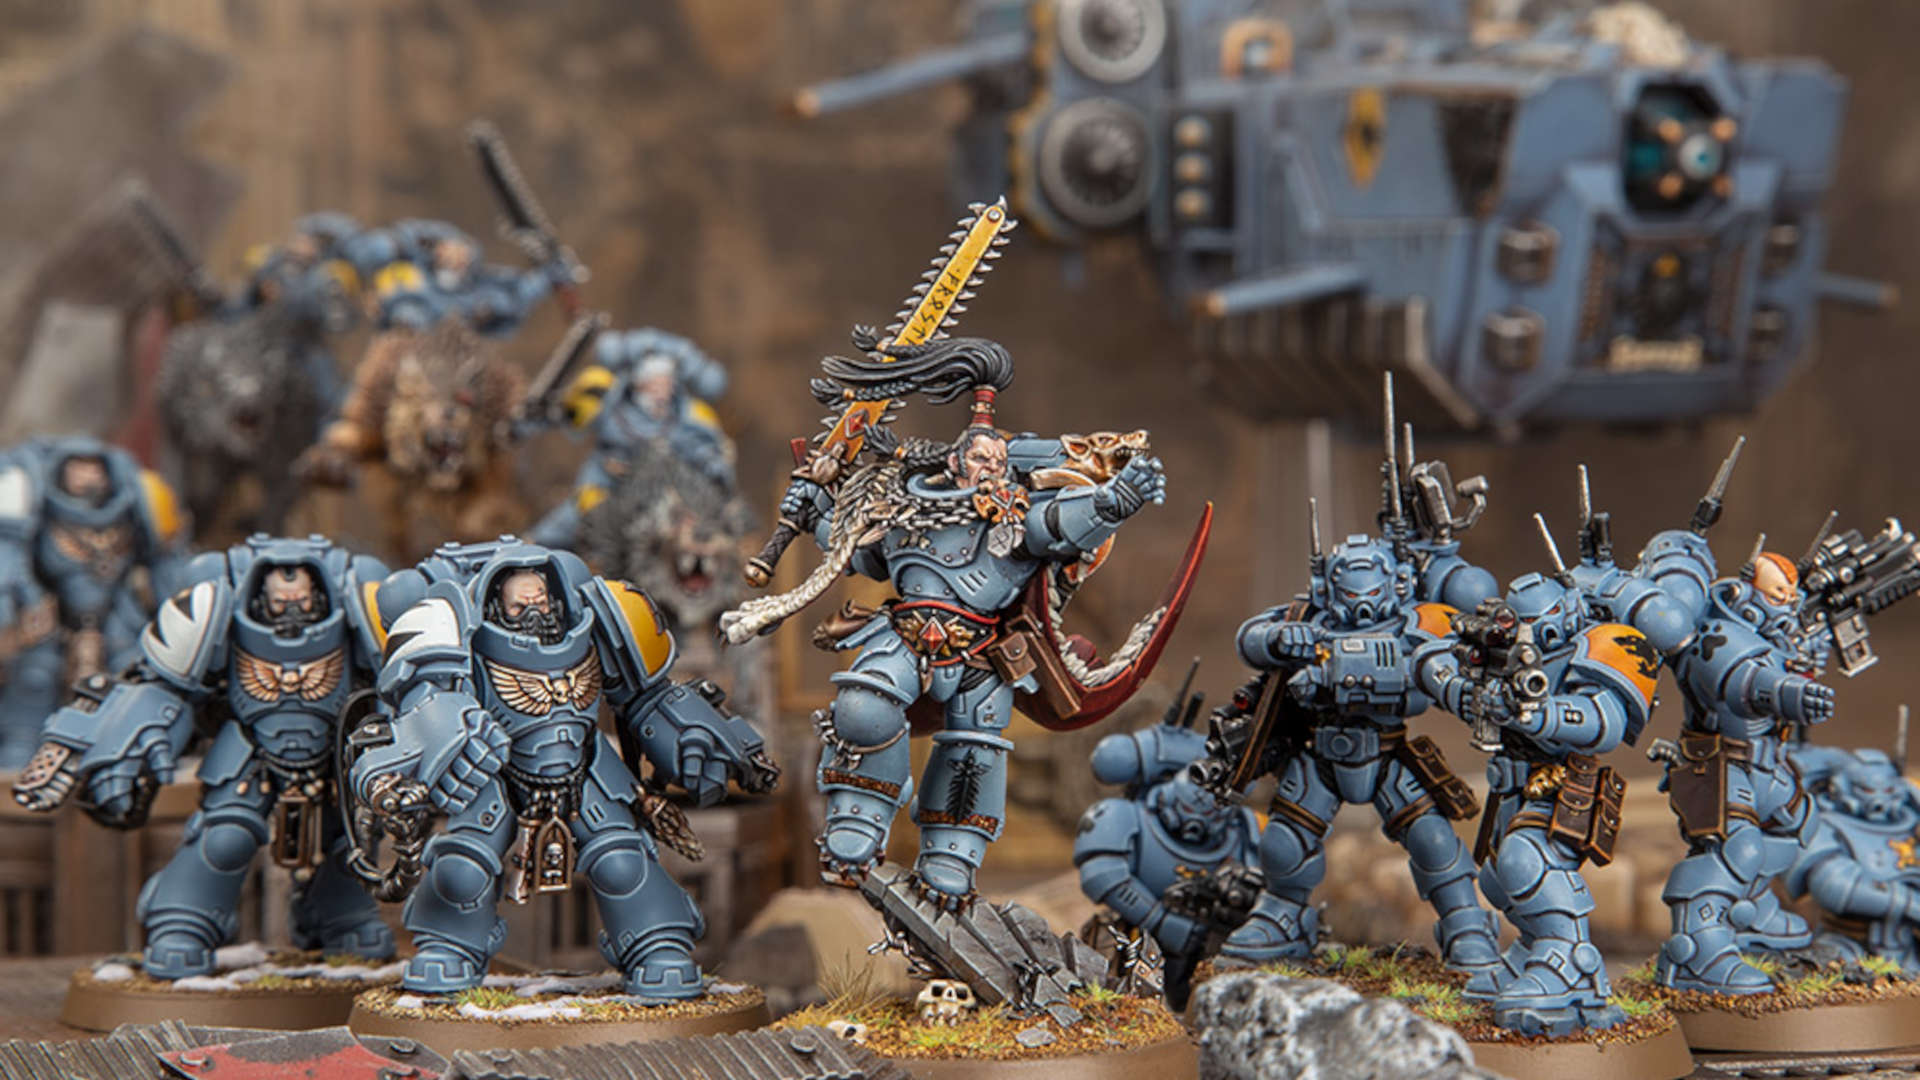 Warhammer 40k Space Wolves - a force of Primaris Space Wolves led by Ragnar Blackmane,a bounding warrior with a huge yellow sword and a topknot of black hair